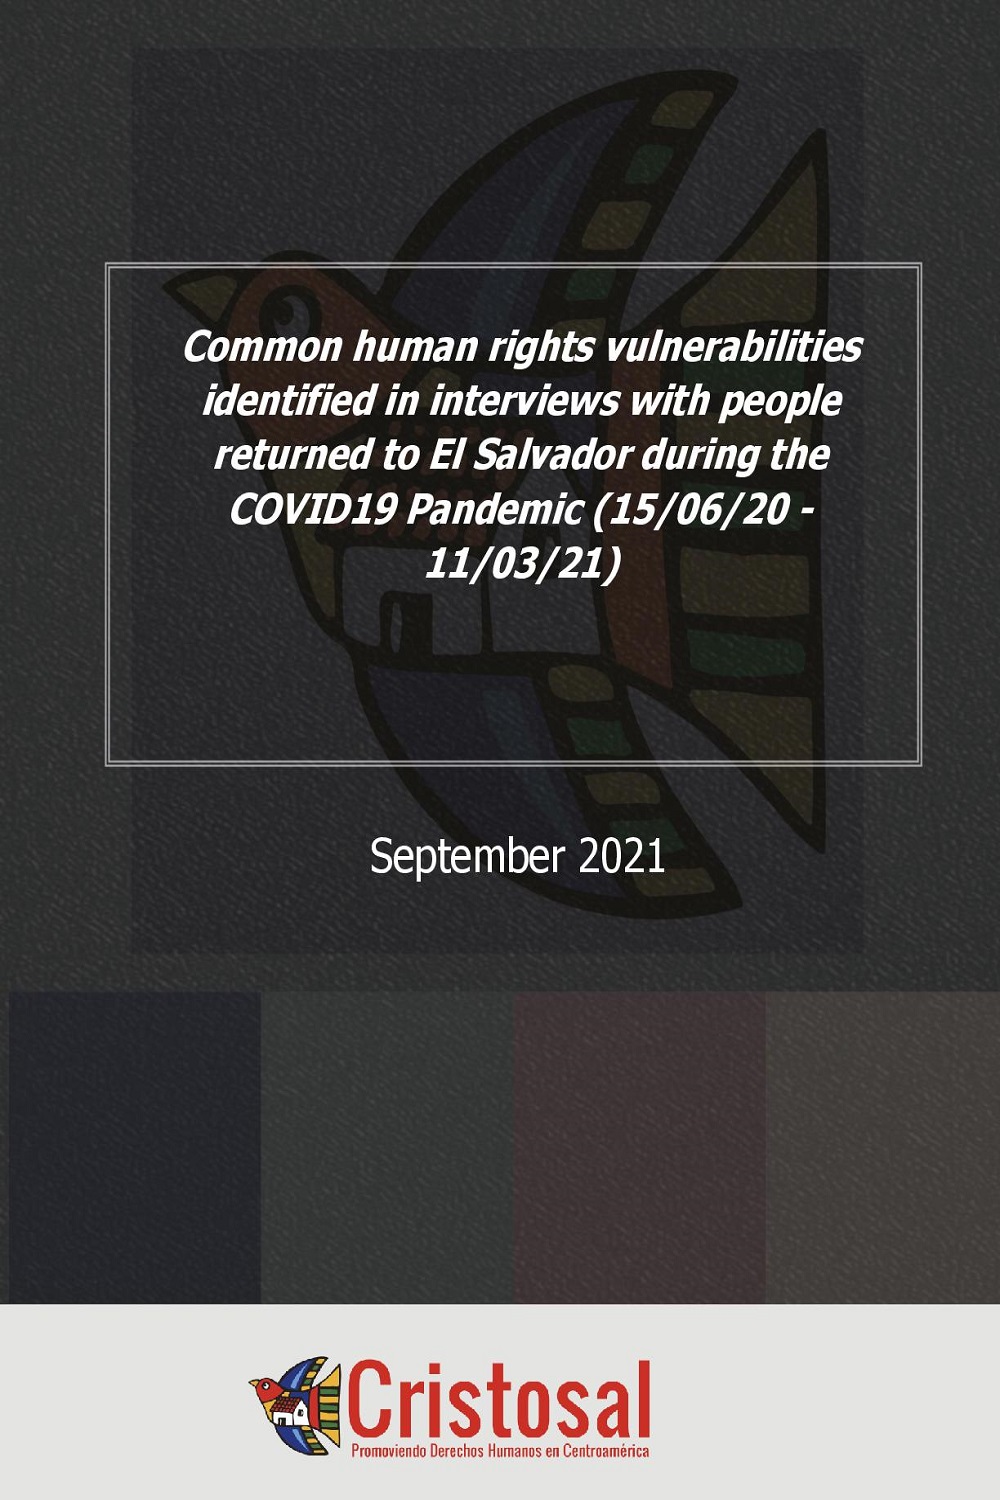 Common human rights vulnerabilities identified in interviews with people returned to El Salvador during the COVID-19 Pandemic